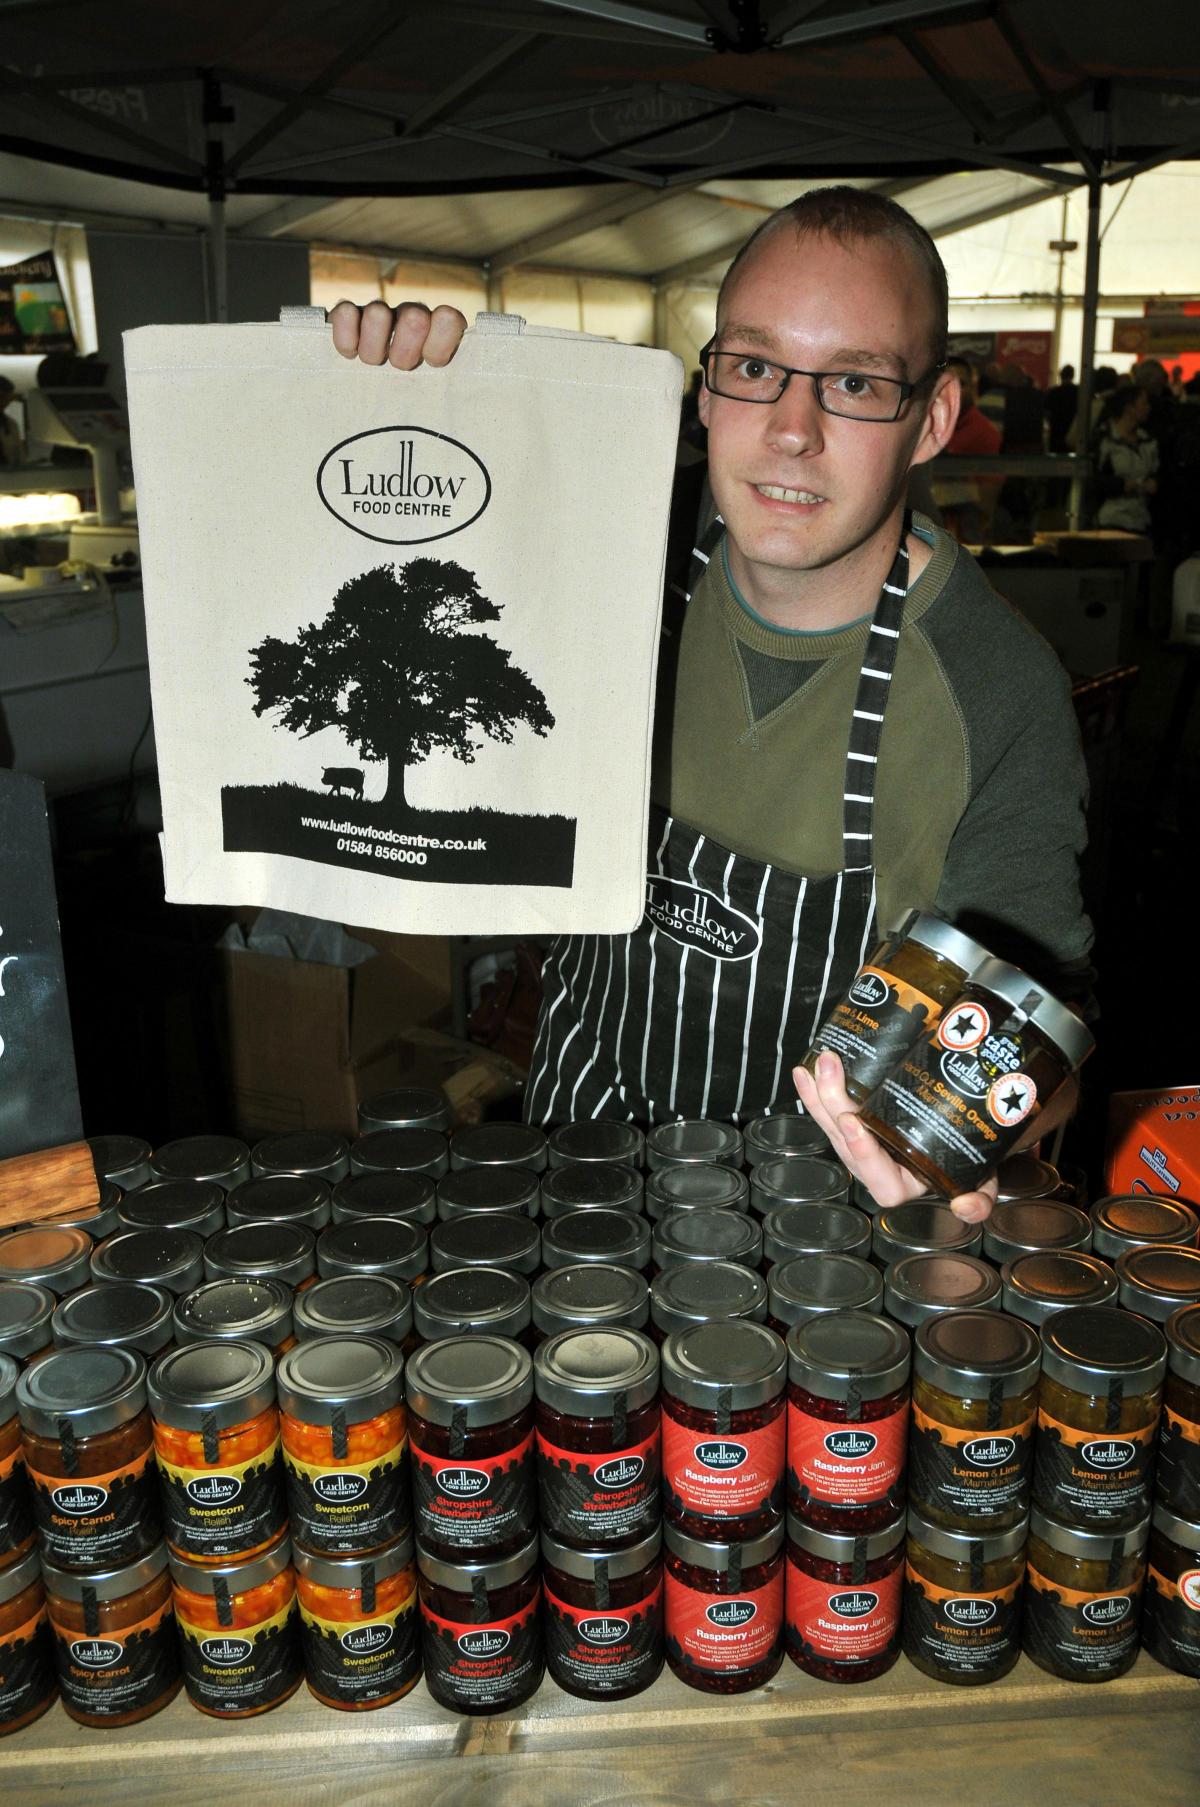 .Ludlow Food Centre's Darren Marsh with a fie selection of pickles and marmalade